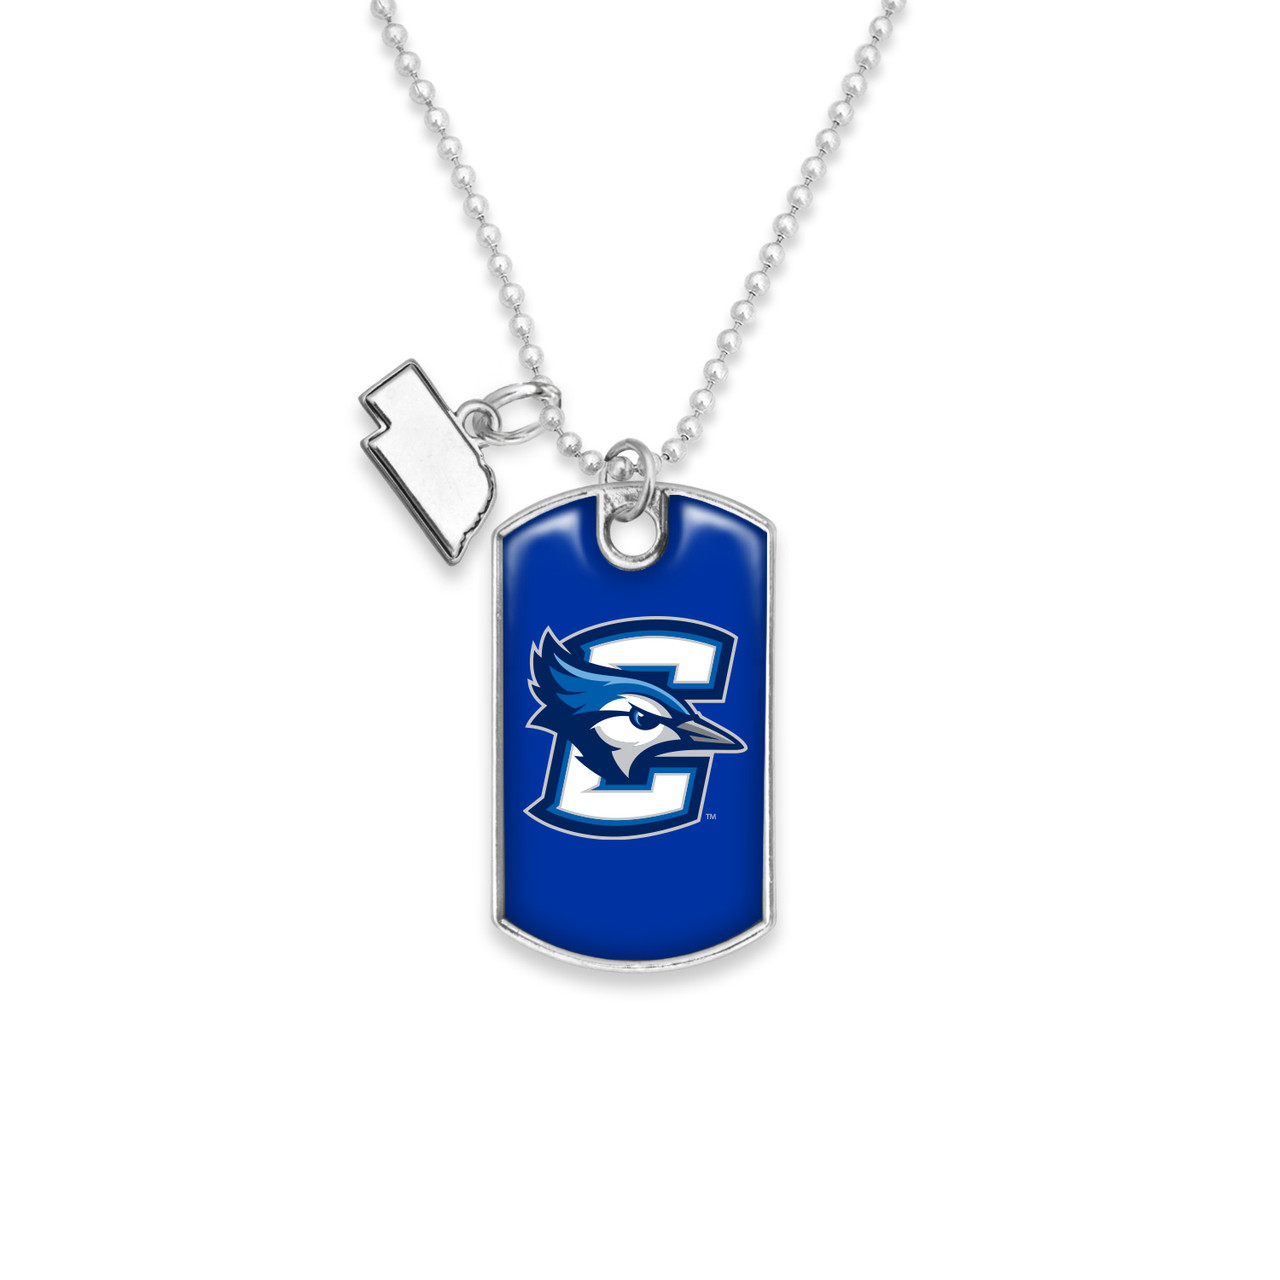 Creighton Bluejays Car Charm- Rear View Mirror Dog Tag with State Charm